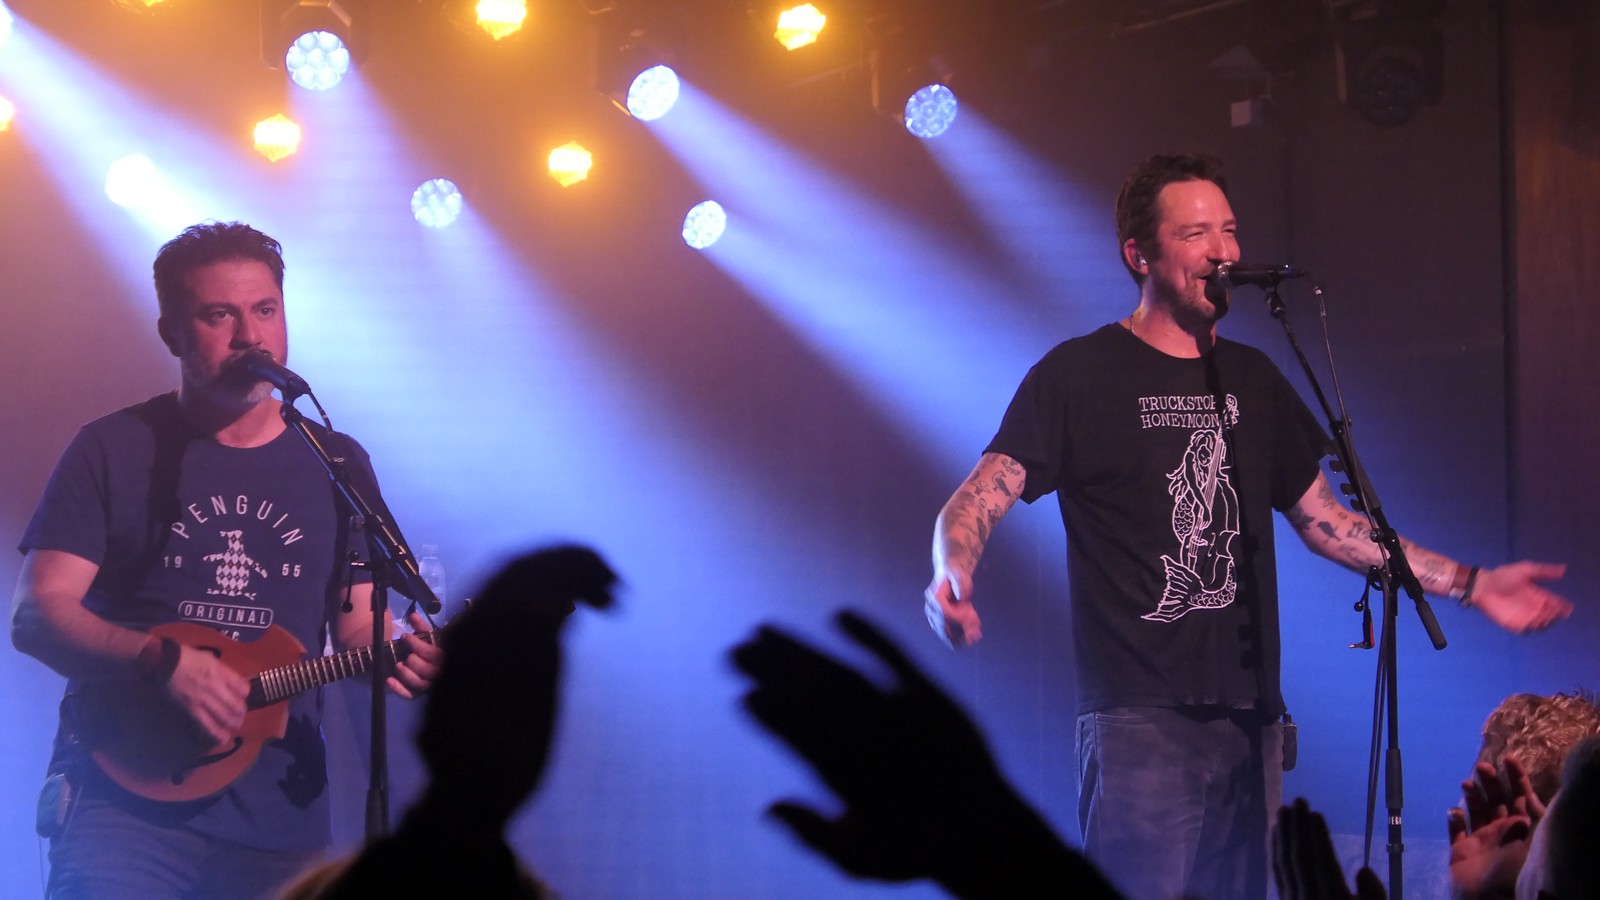 Photo of Matt Nasir on mandoline and Frank Turner without a guitar on stage. Frank is smiling. In the foreground there are a few clapping hands